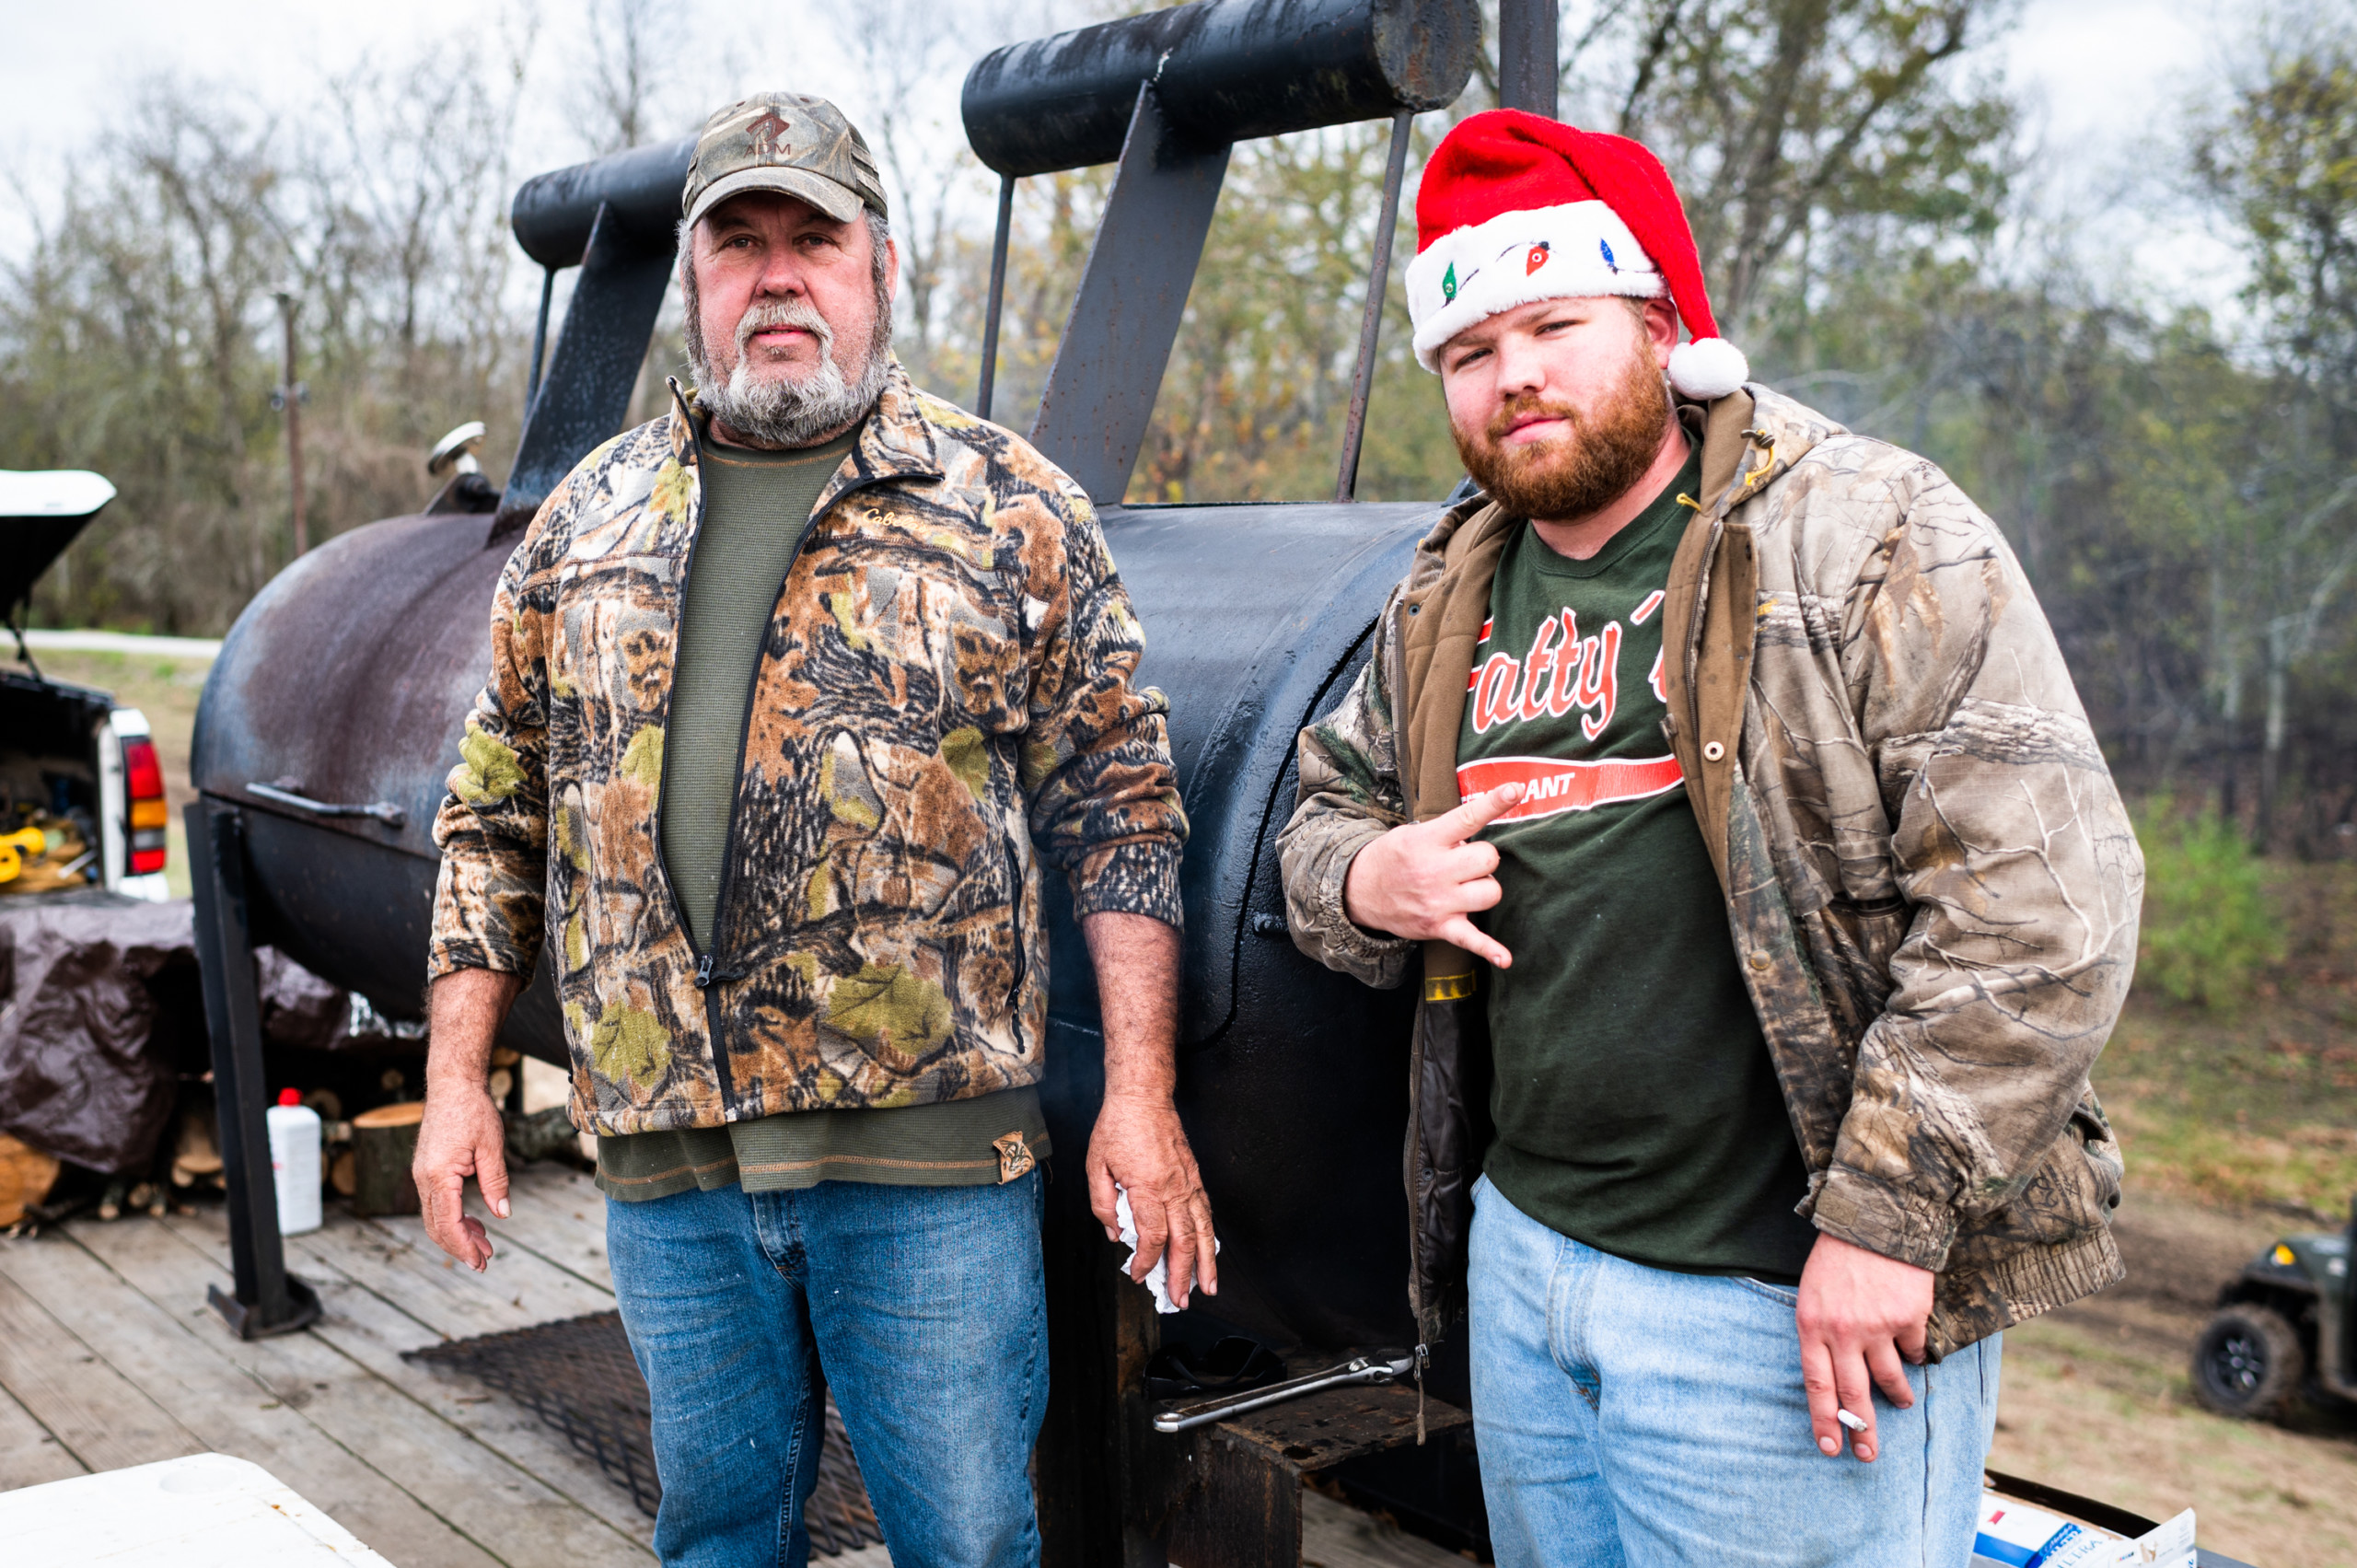 Two of the crew members who built the structure stand in front of smoker filled with two wild hogs